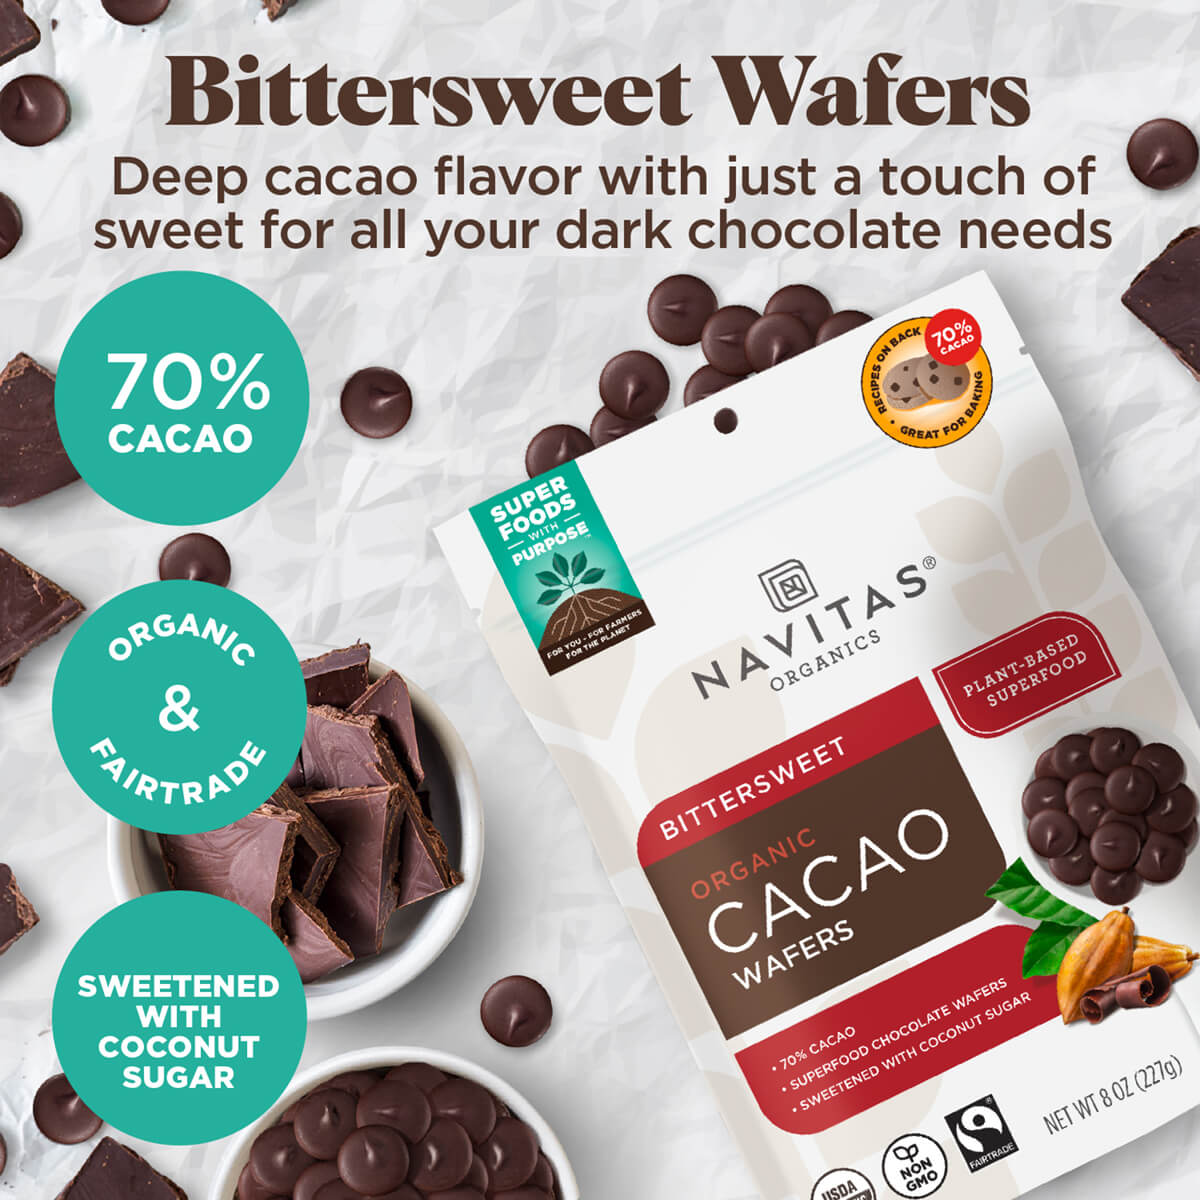 Bittersweet Wafers have a deep cacao flavor with just a touch of sweet for all your dark chocolate needs. 70% cacao, organic & Fairtrade, sweetened with coconut sugar.